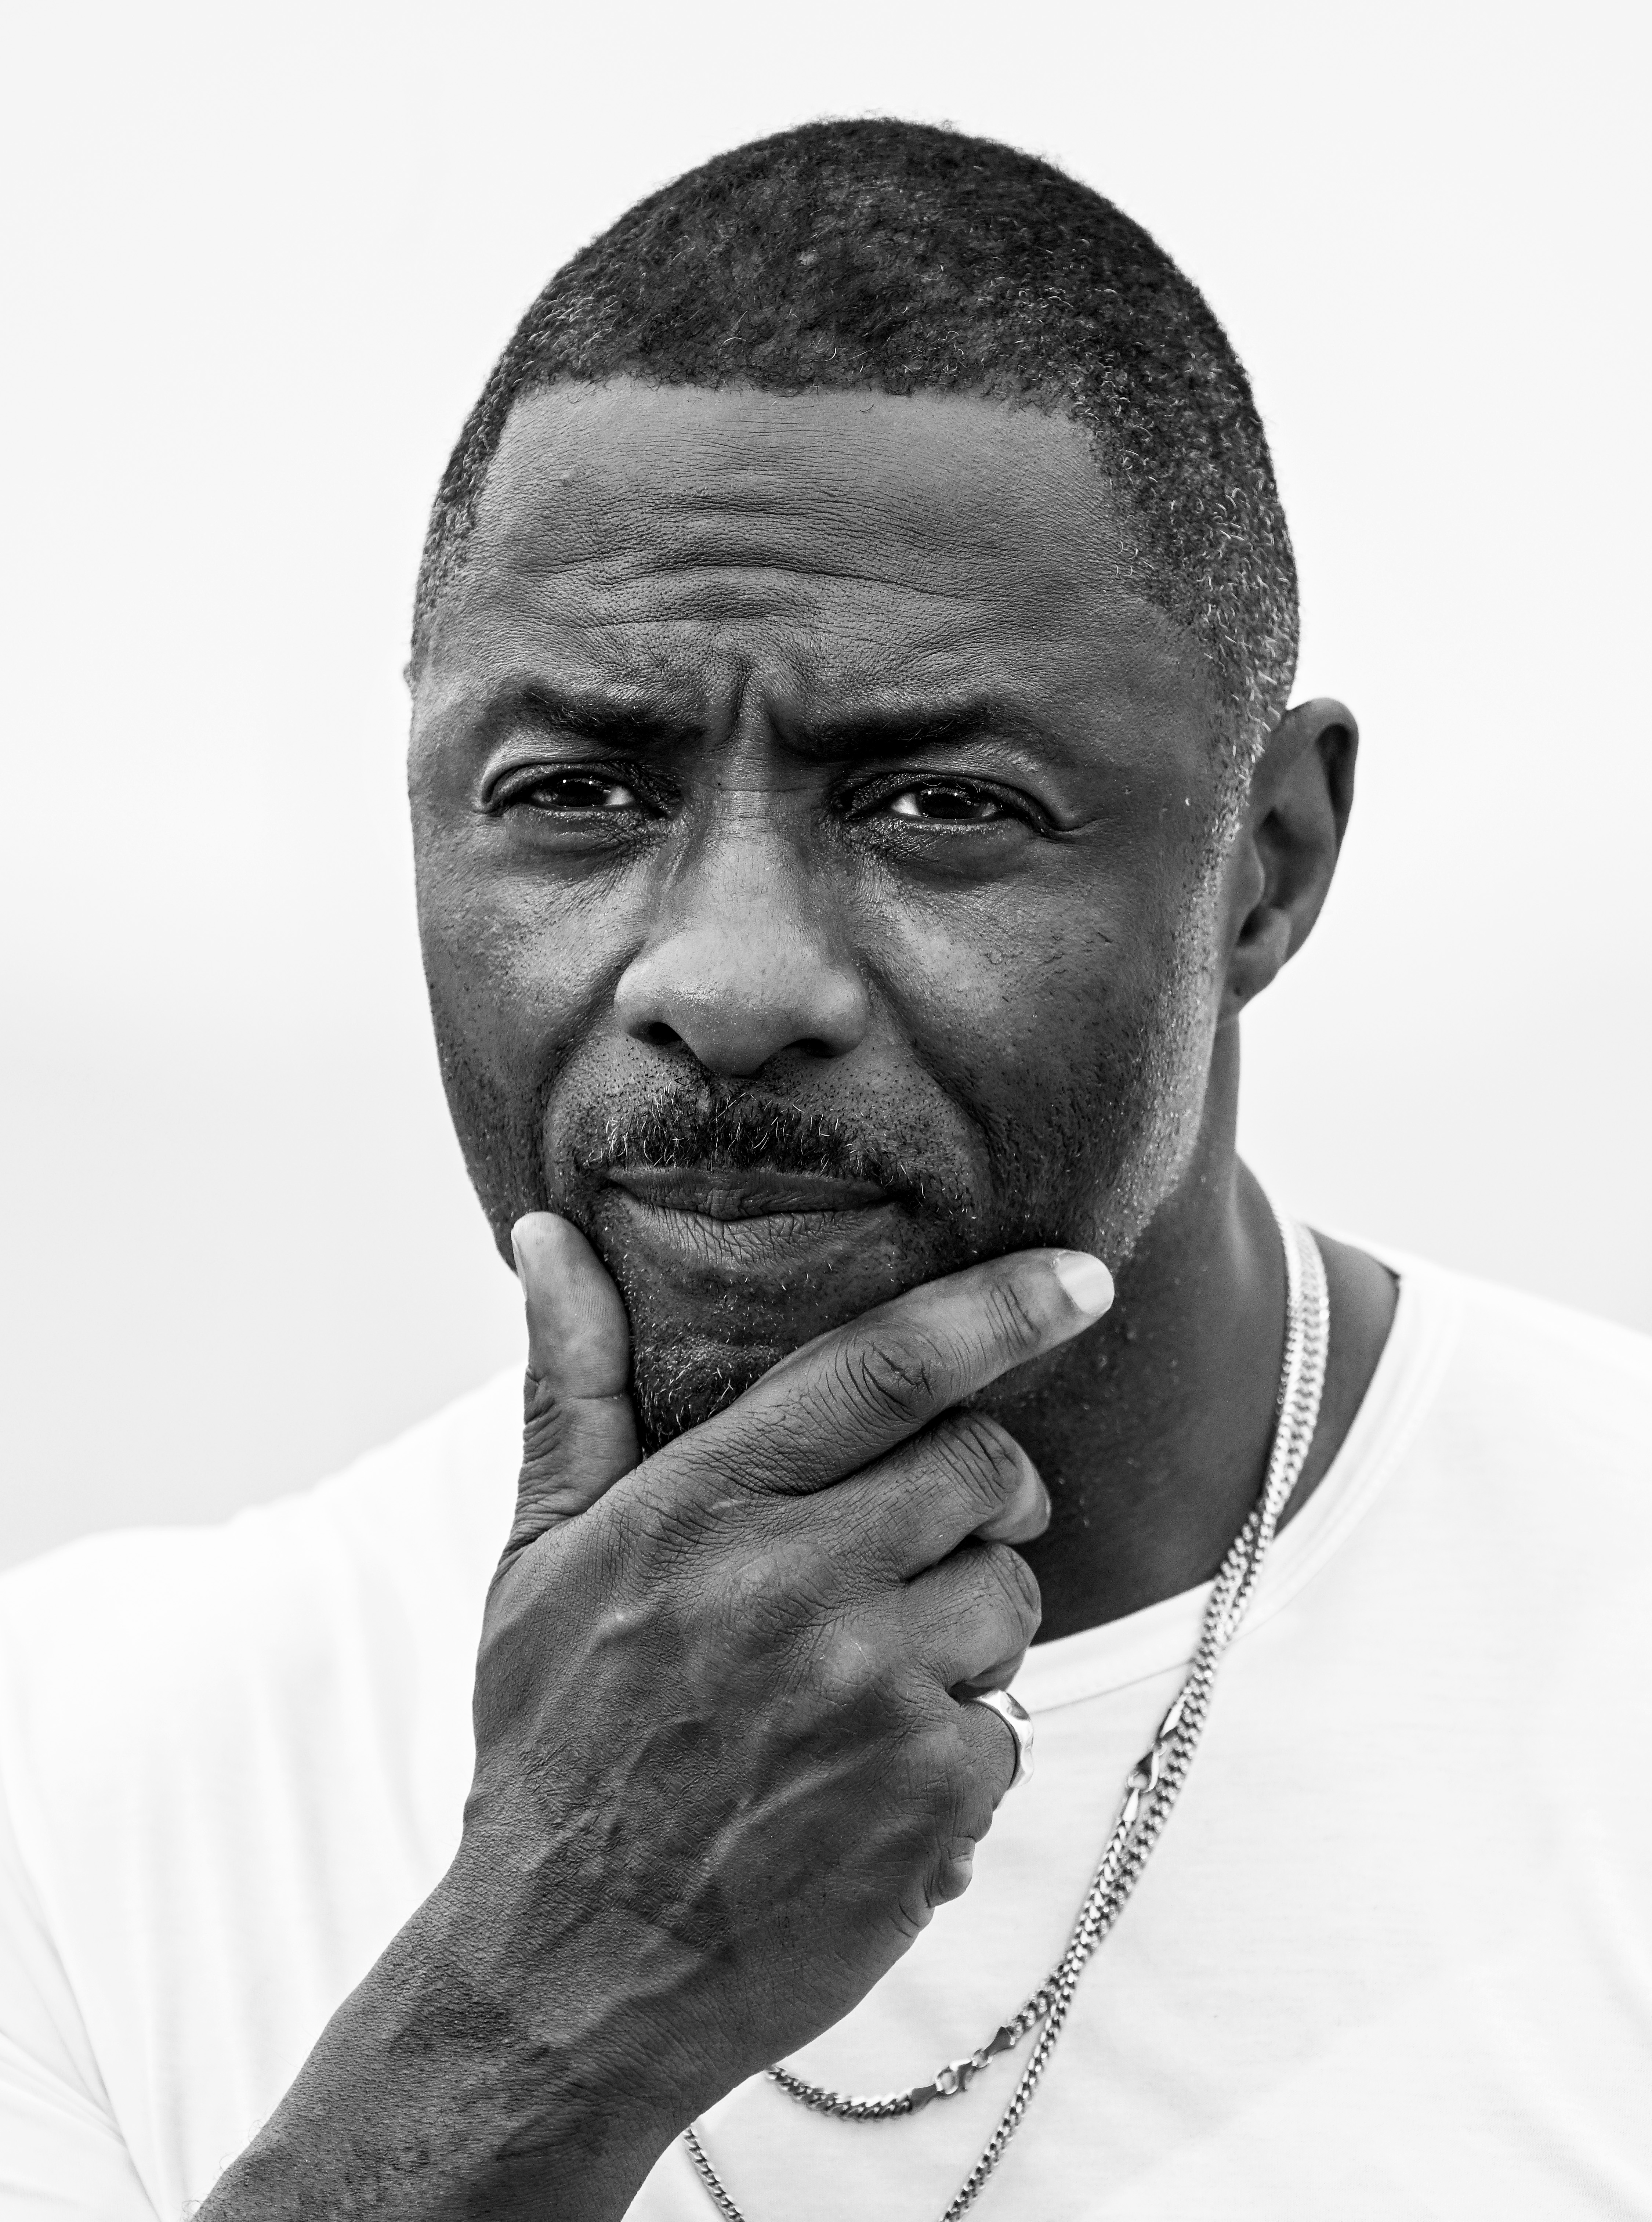 Idris Elba attends the photocall for "Three Thousand Years Of Longing" during the 75th annual Cannes film festival at Palais des Festivals on May 21, 2022 in Cannes, France. | Source: Getty Images